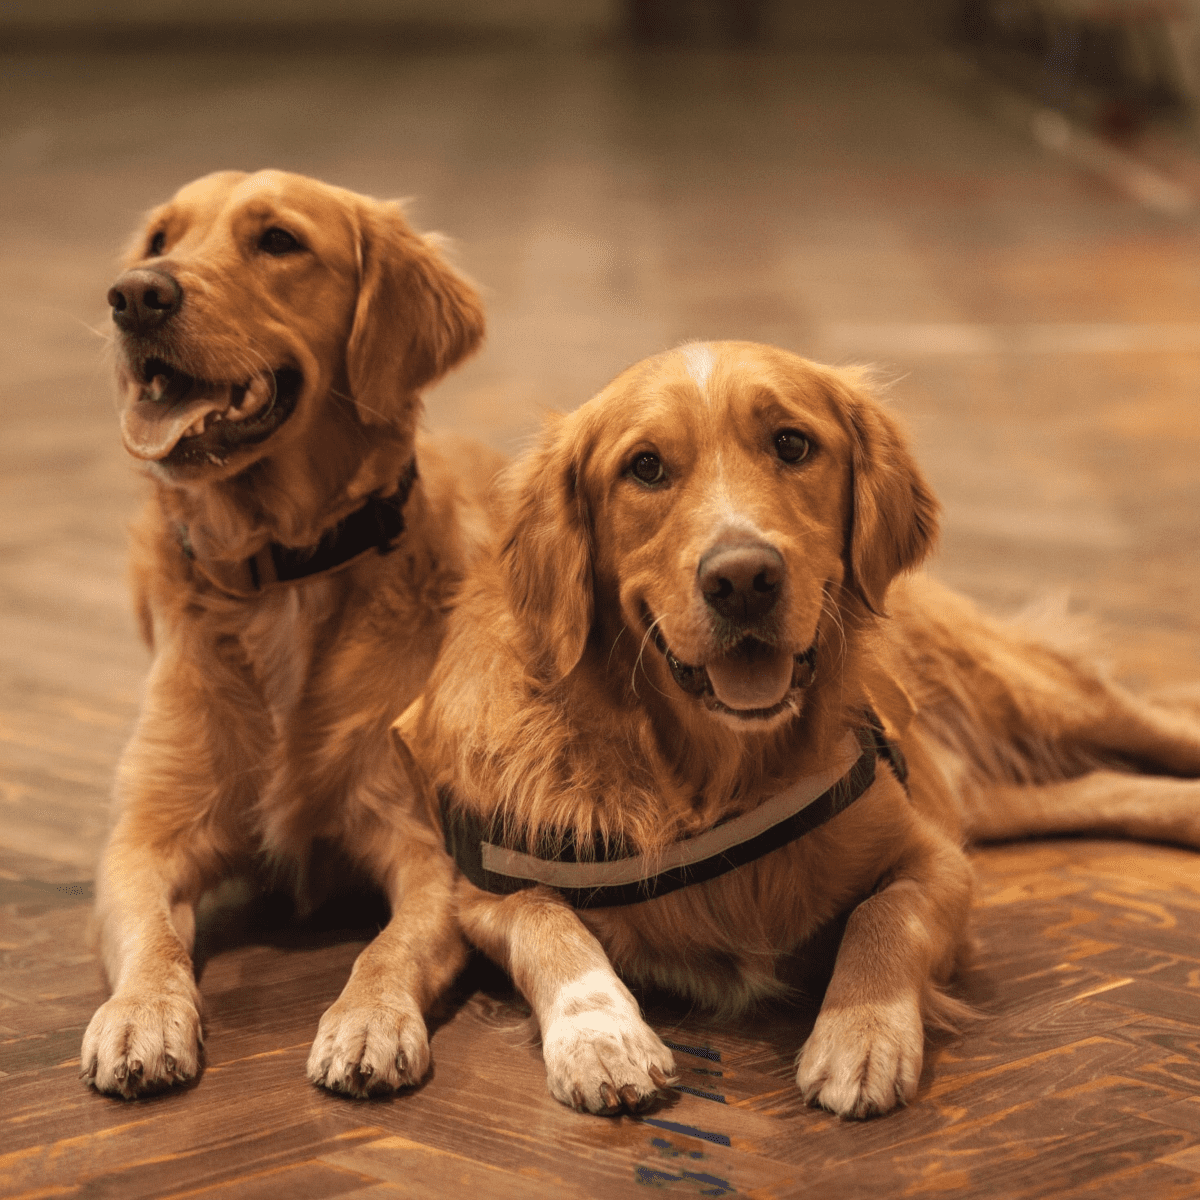 what two dogs make a golden retriever